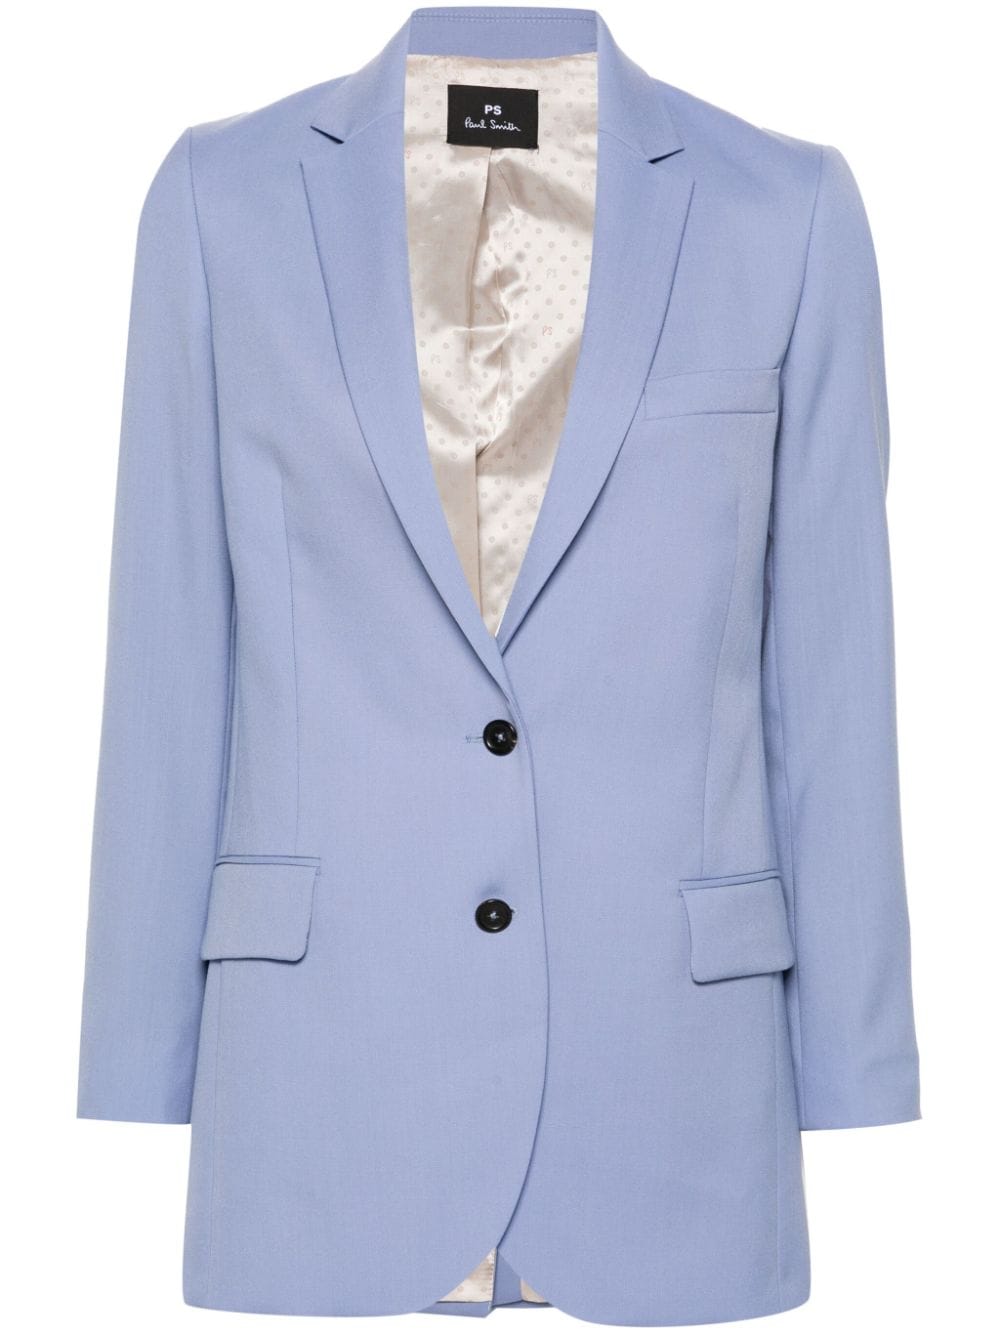 PS Paul Smith wool single-breasted blazer - Blue von PS Paul Smith